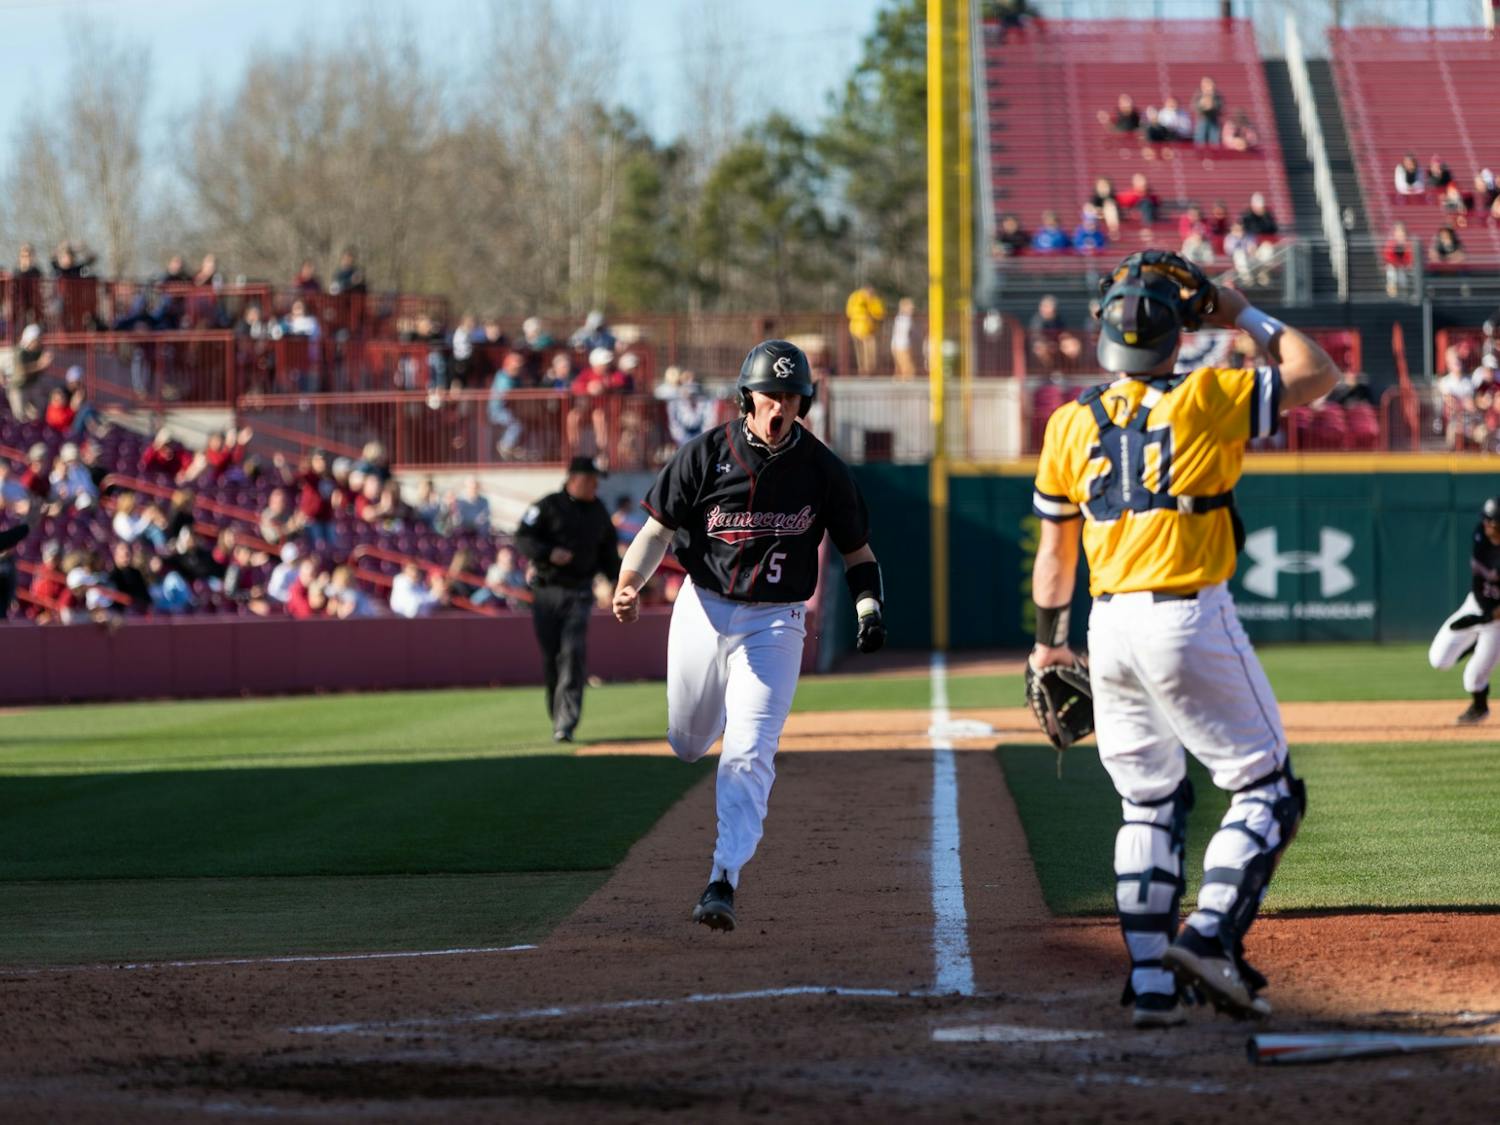 USC Freshman Talmadge LaCroy runs to home plate during the last game of the series on Feb. 20, 2022. Carolina defeated UNCG in the last game of their series 8-7.&nbsp;